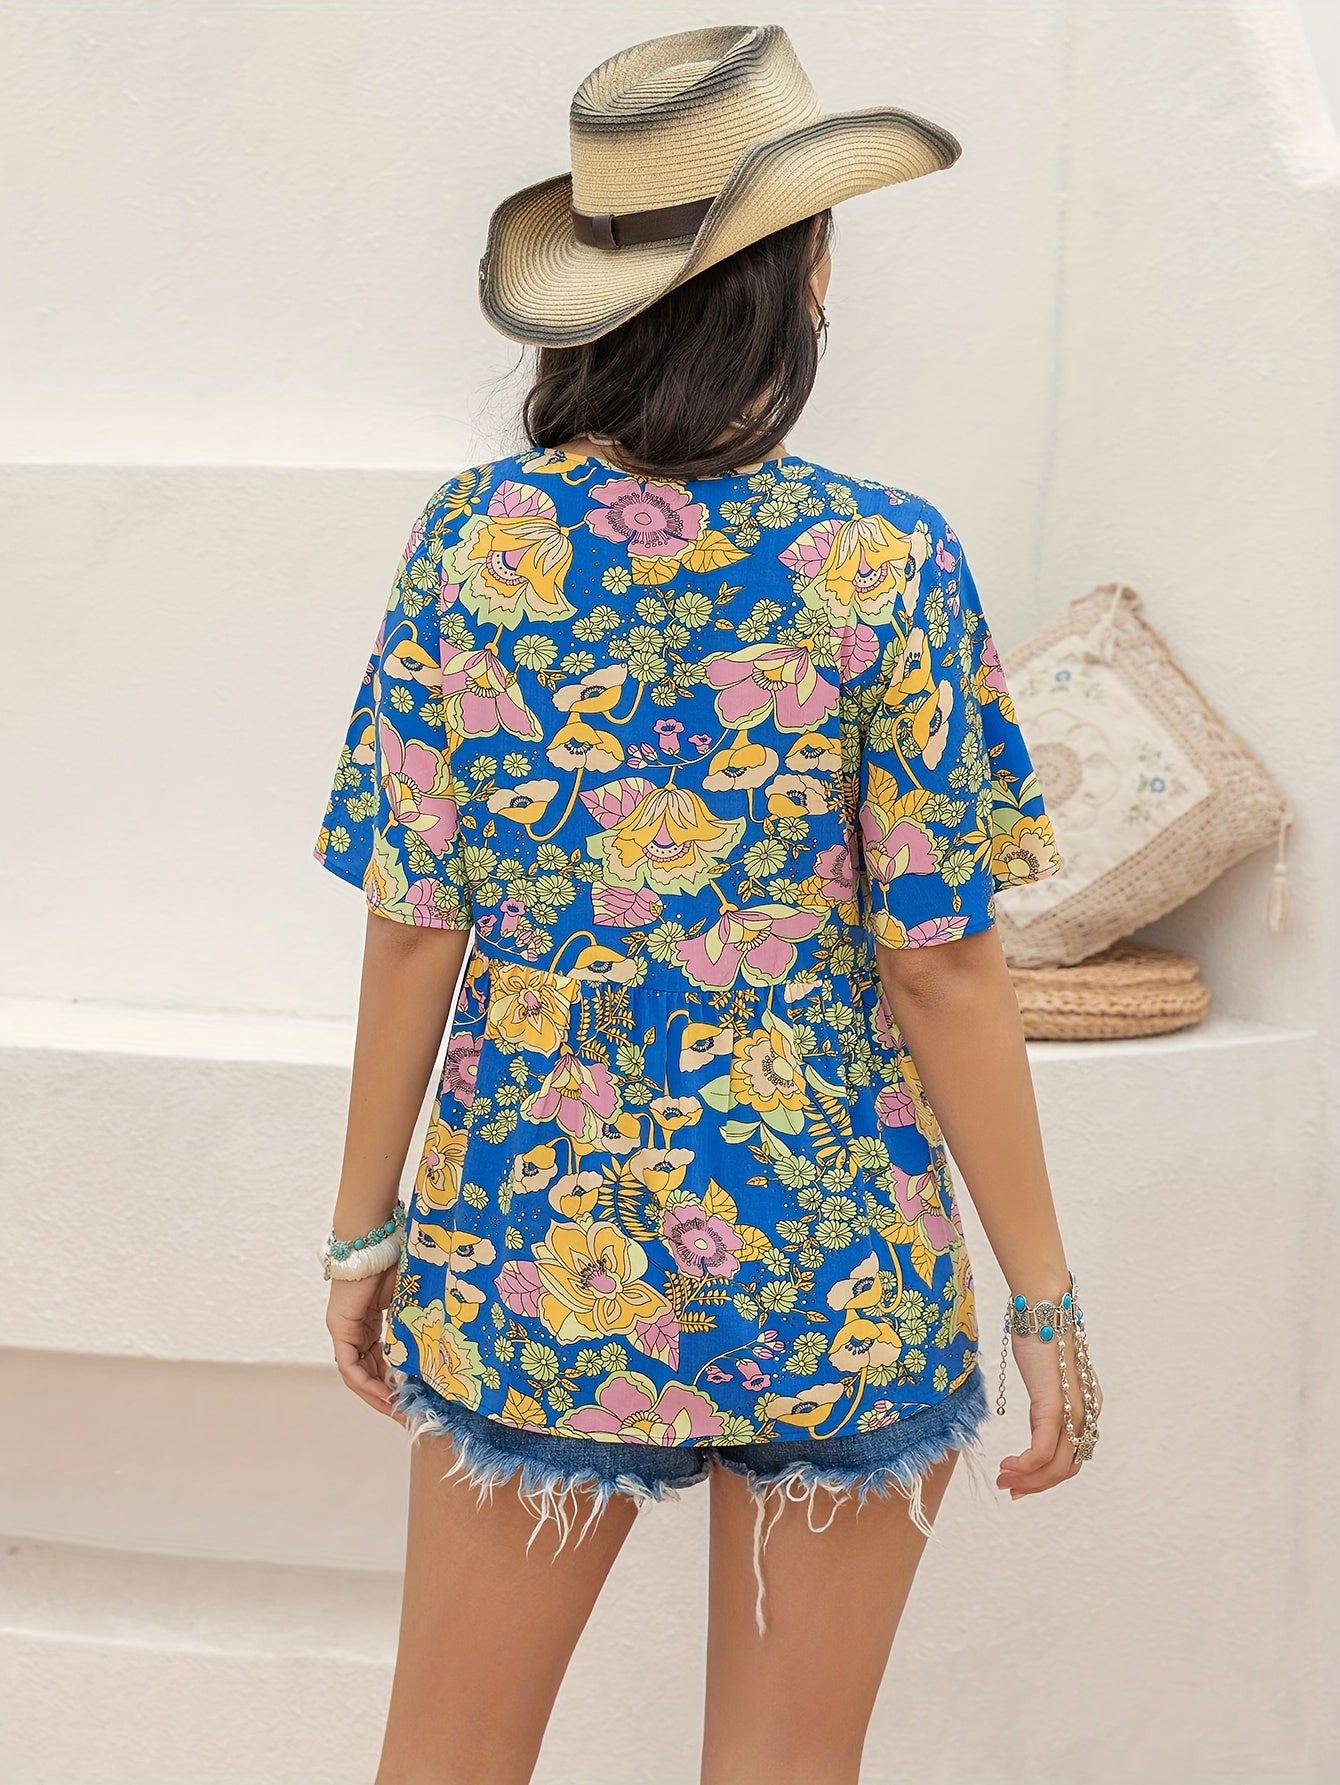 Bohemian Floral Print Short Ruffle Sleeve Tops For Spring and Summer, Women's Summer Tops